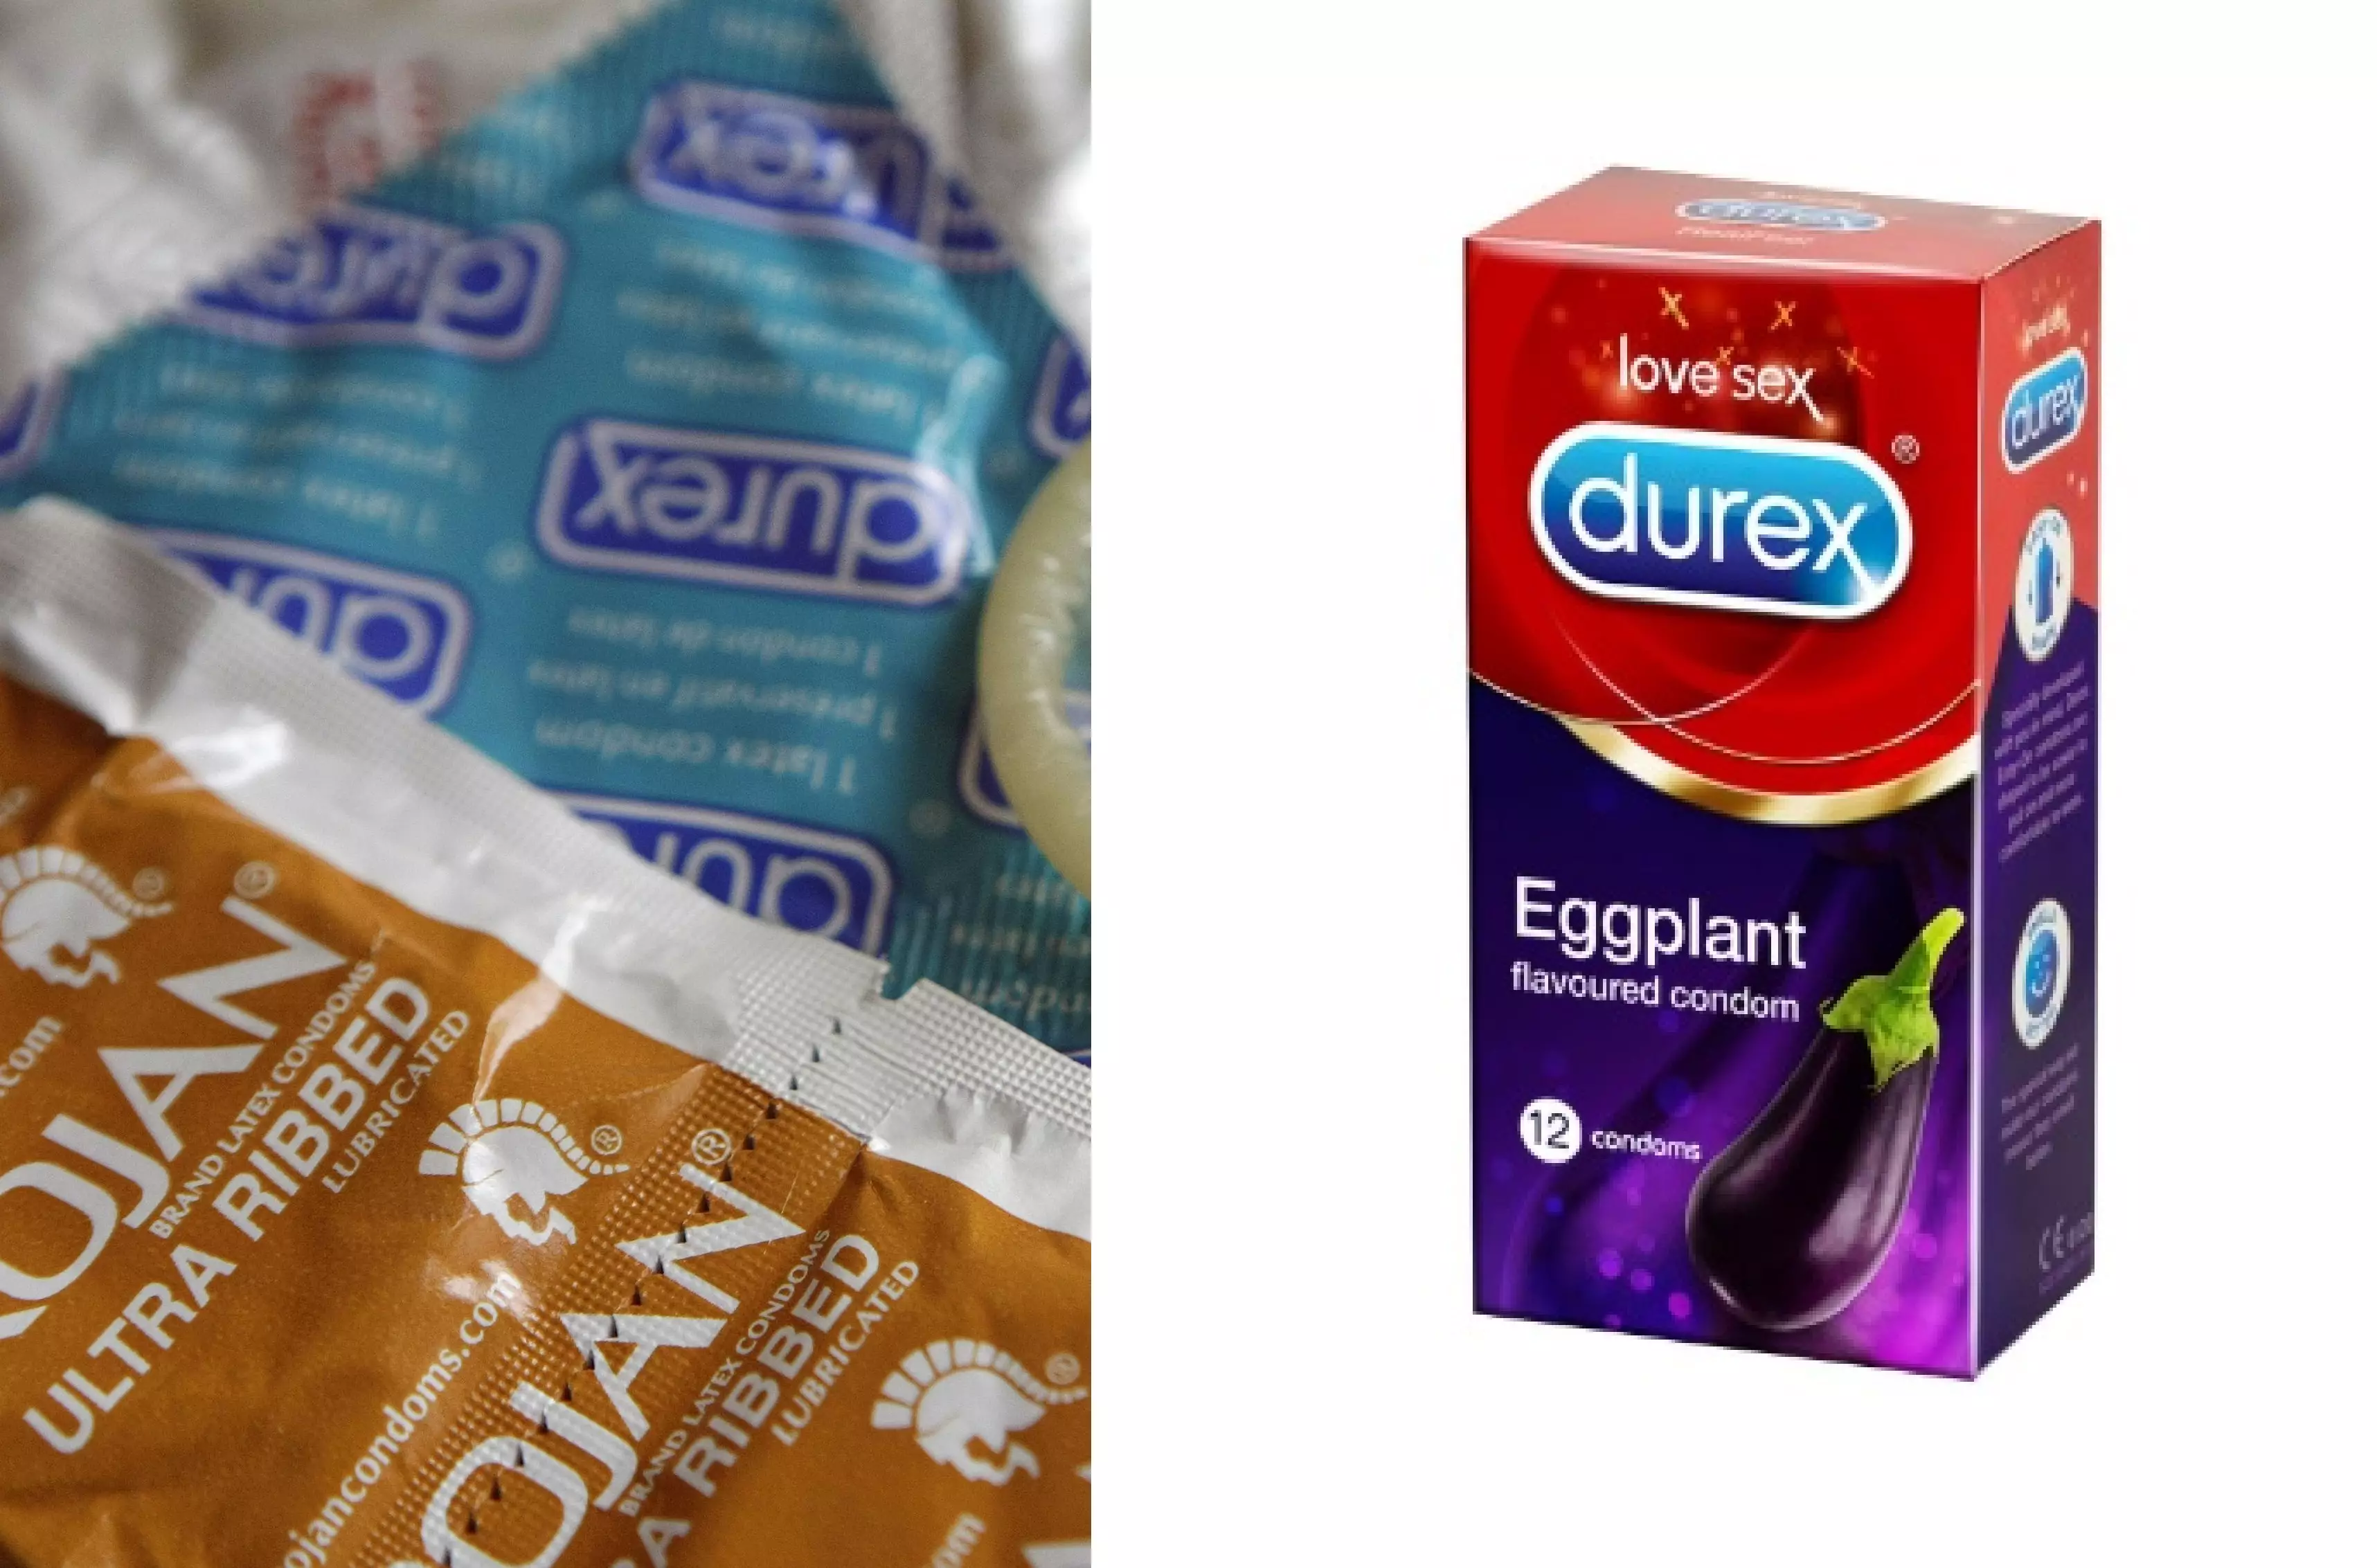 Durex Global Has Announced The Launch Of Aubergine Flavoured Condoms On Twitter